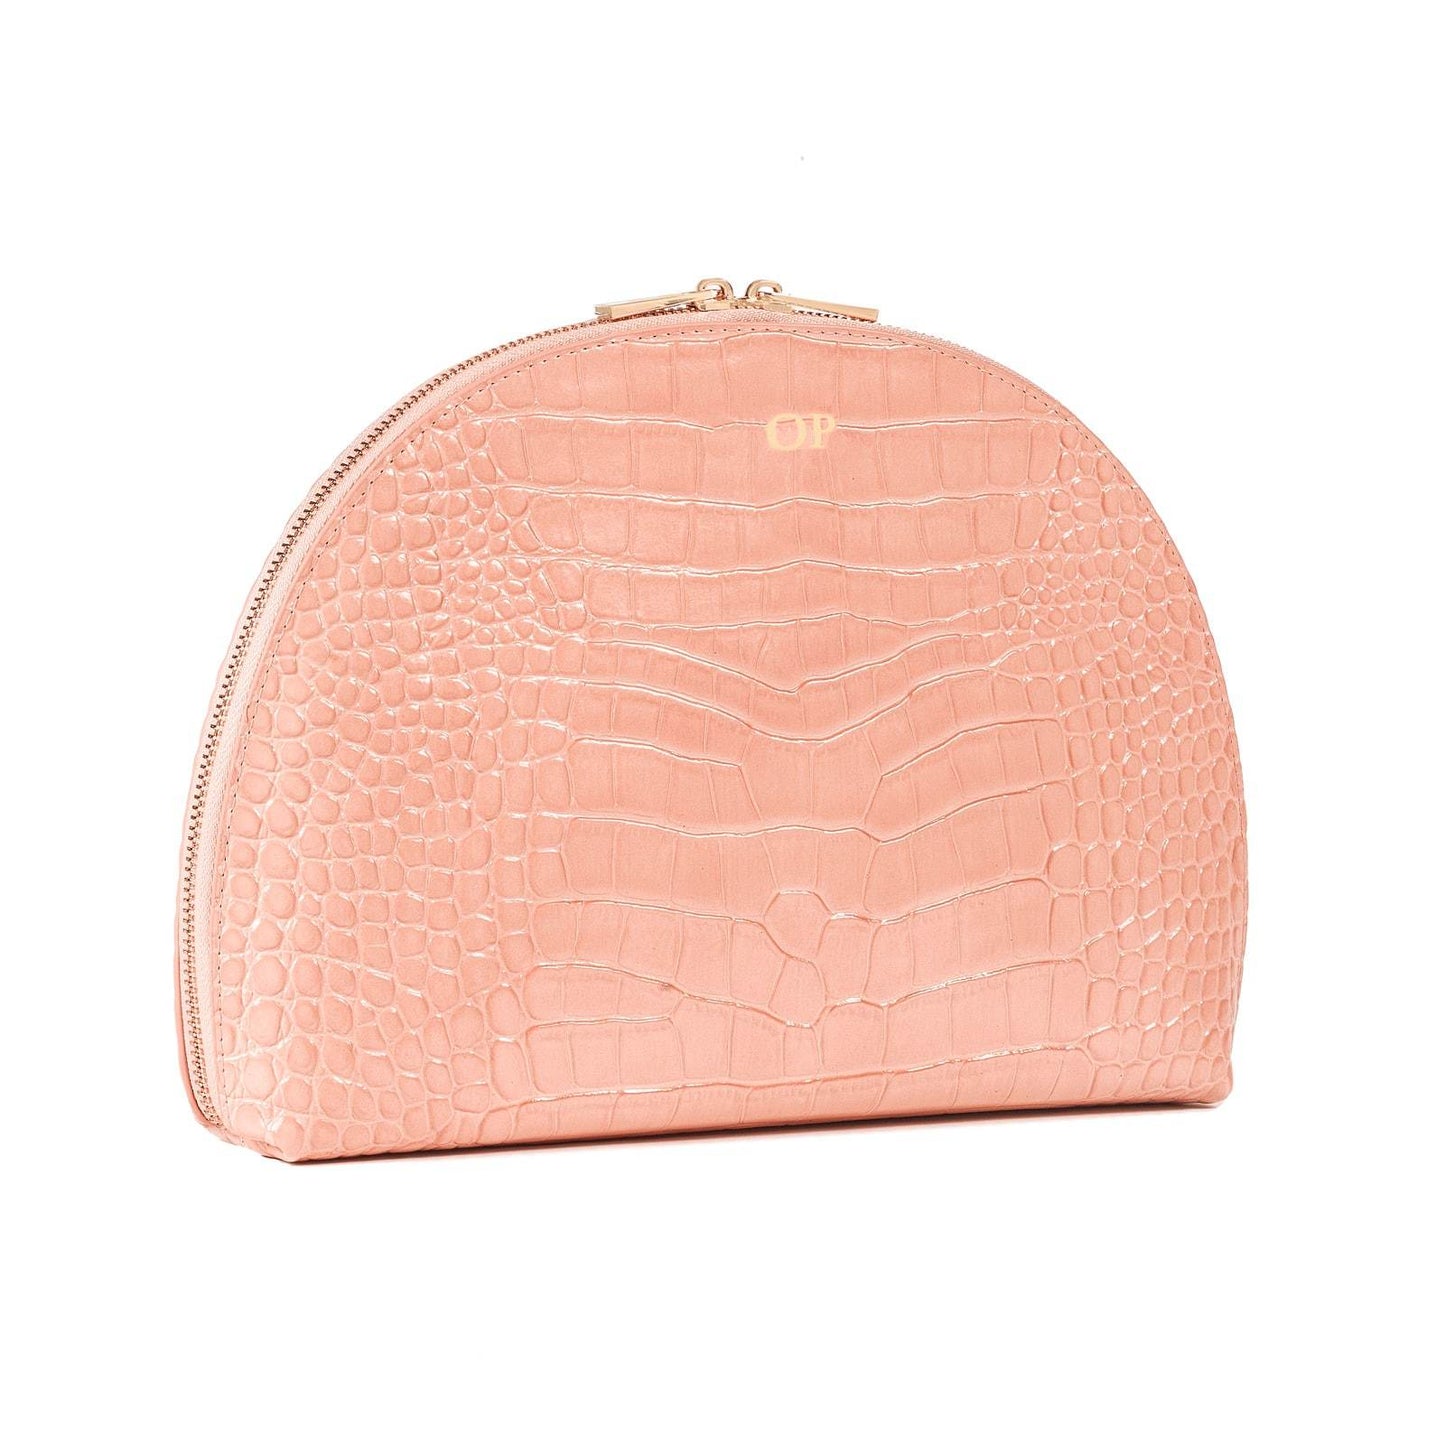 Personalised Pink Croc Leather Half Moon Clutch side image